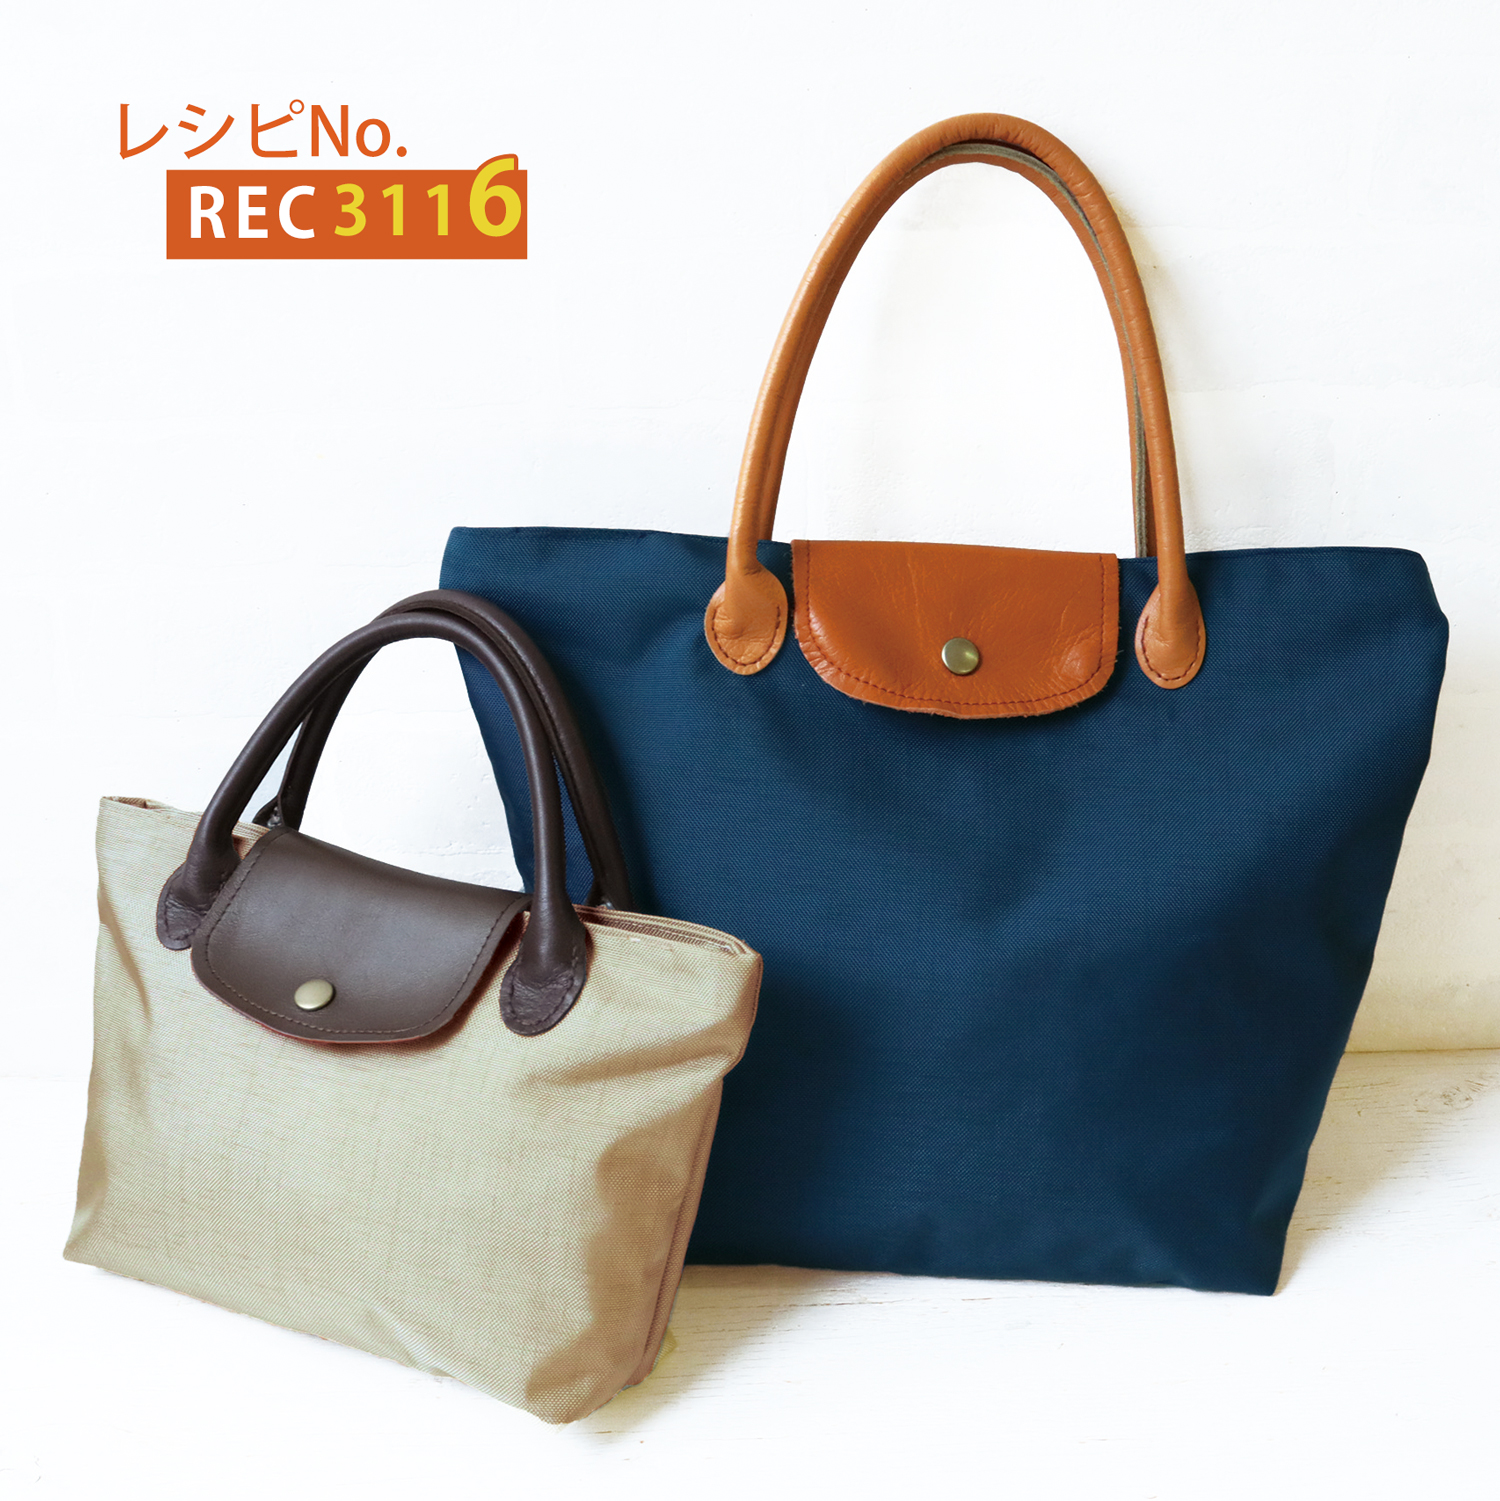 REC3116 Tote Bag (with flaps) Sewing Instructions (pcs)